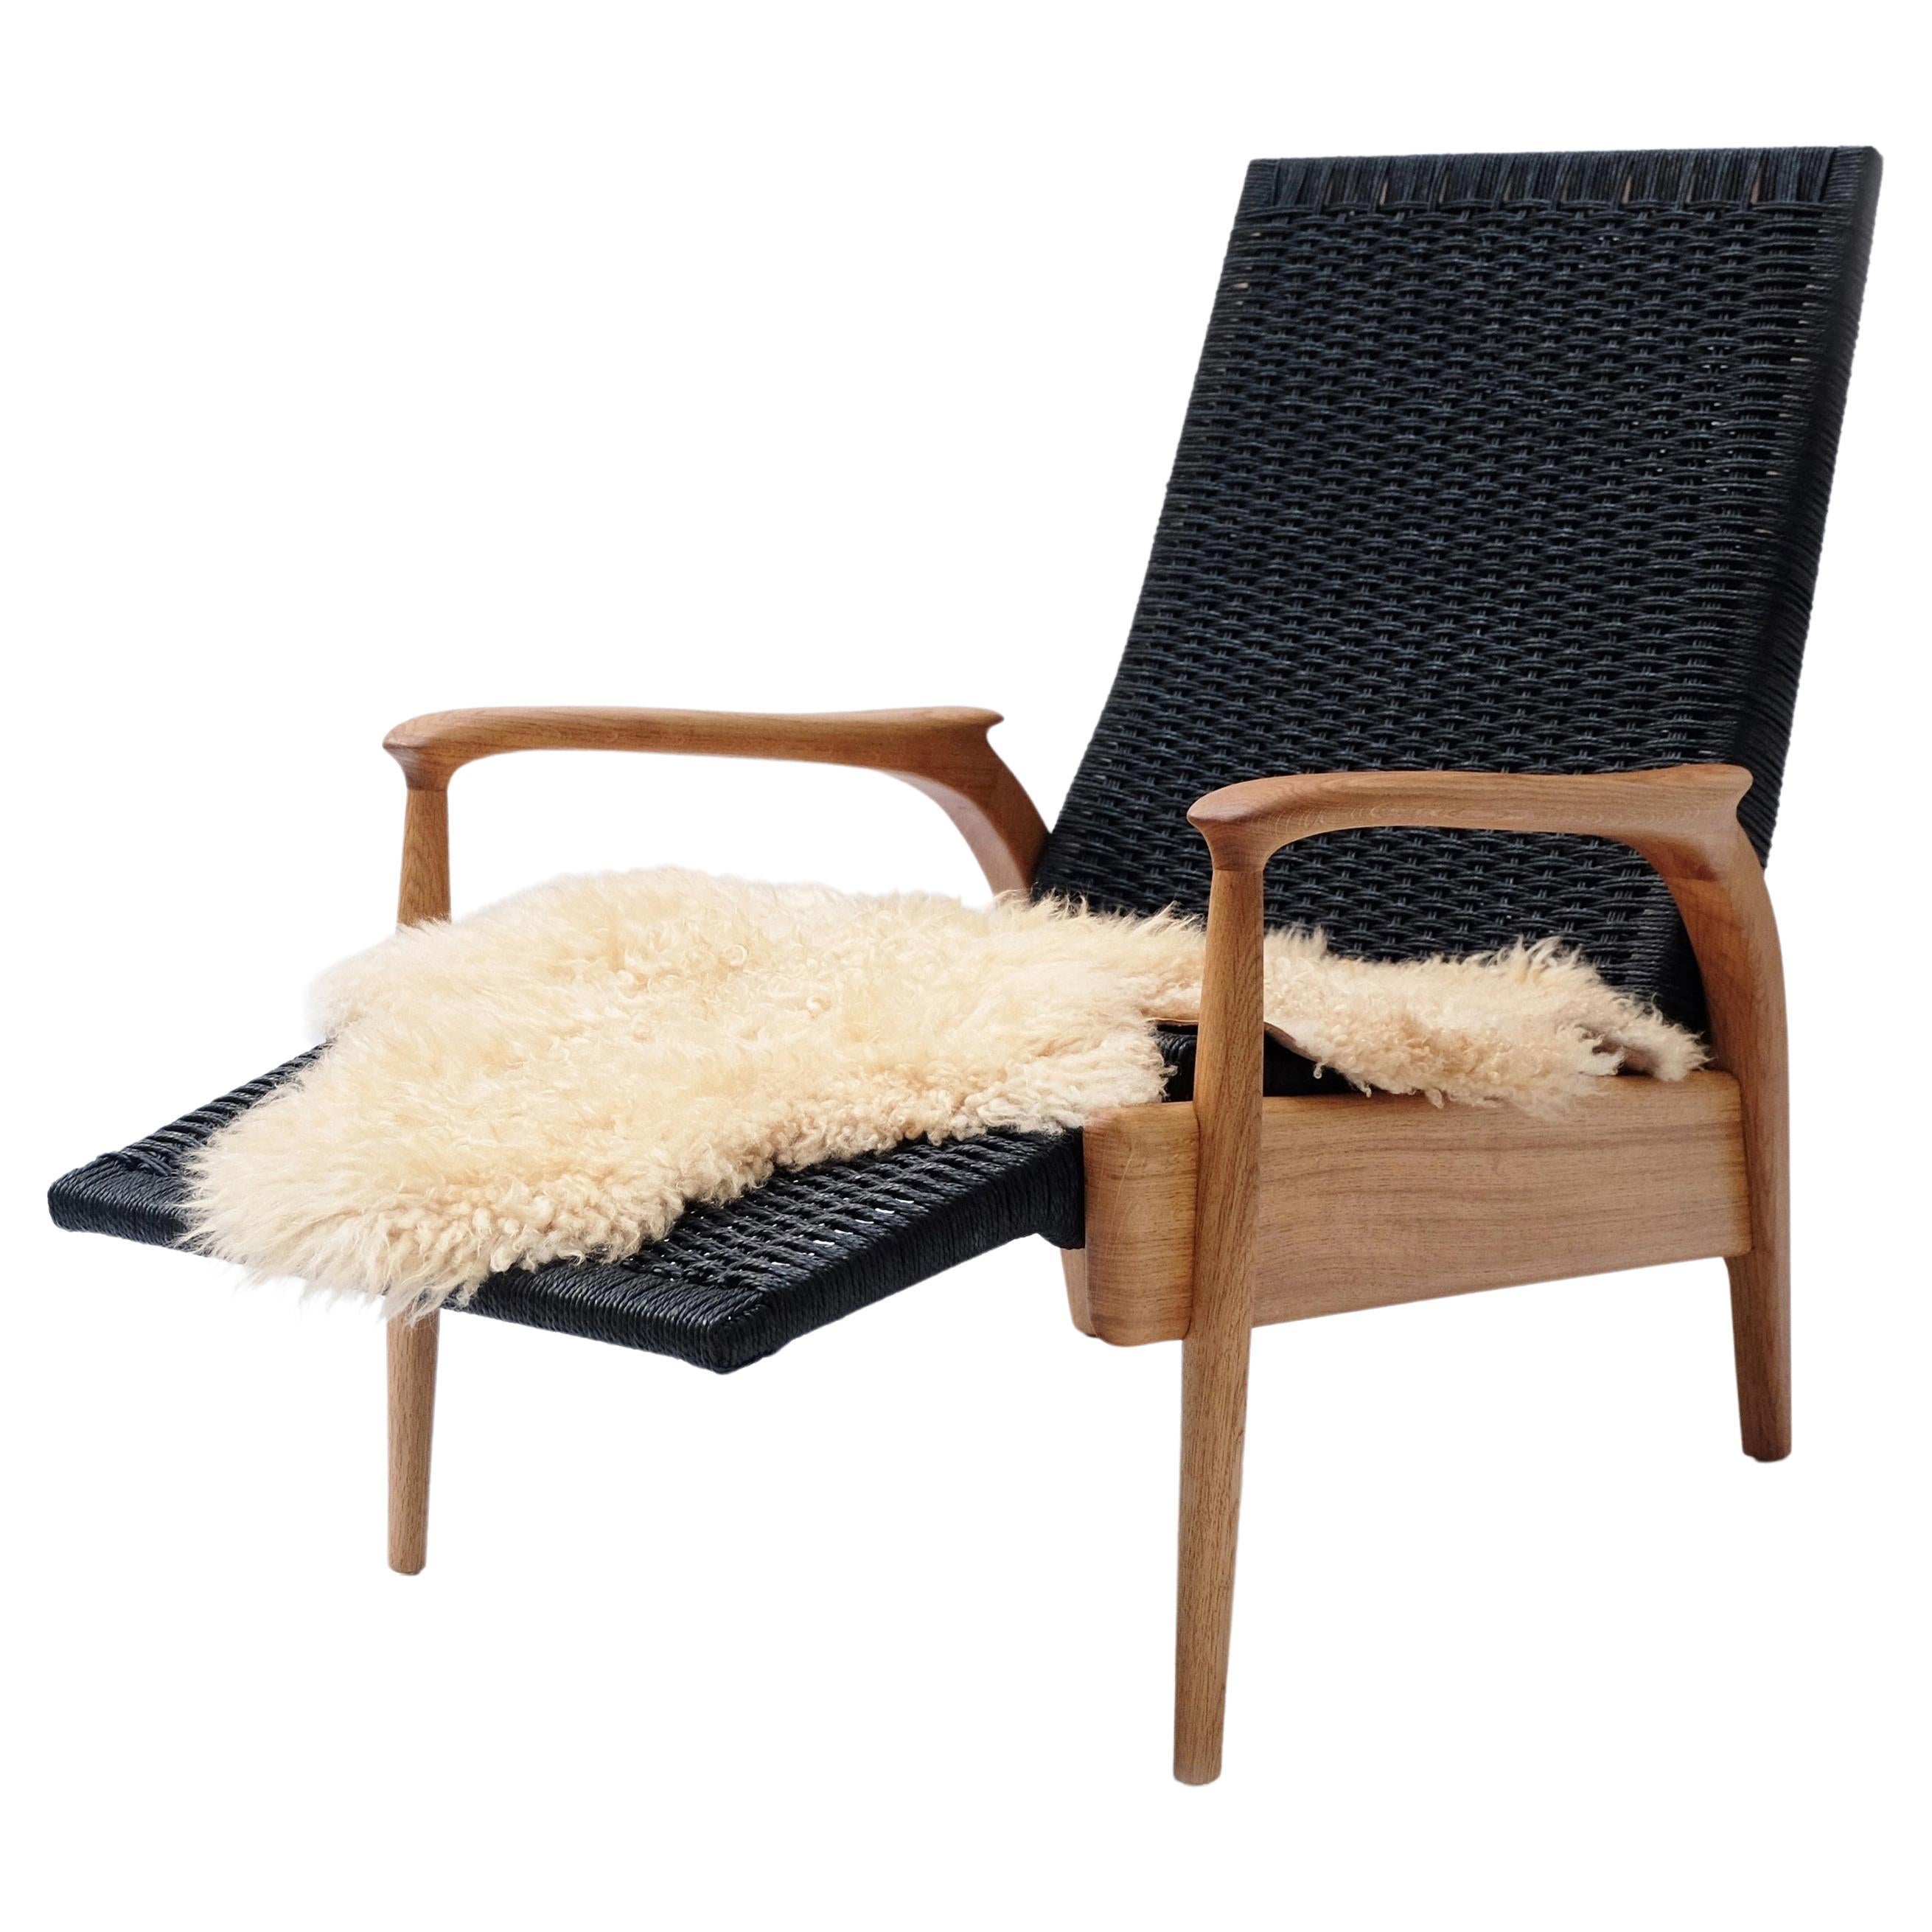 Custom-Made Handcrafted Reclining Lounge Chair in Oiled Oak& Black Danish Cord For Sale